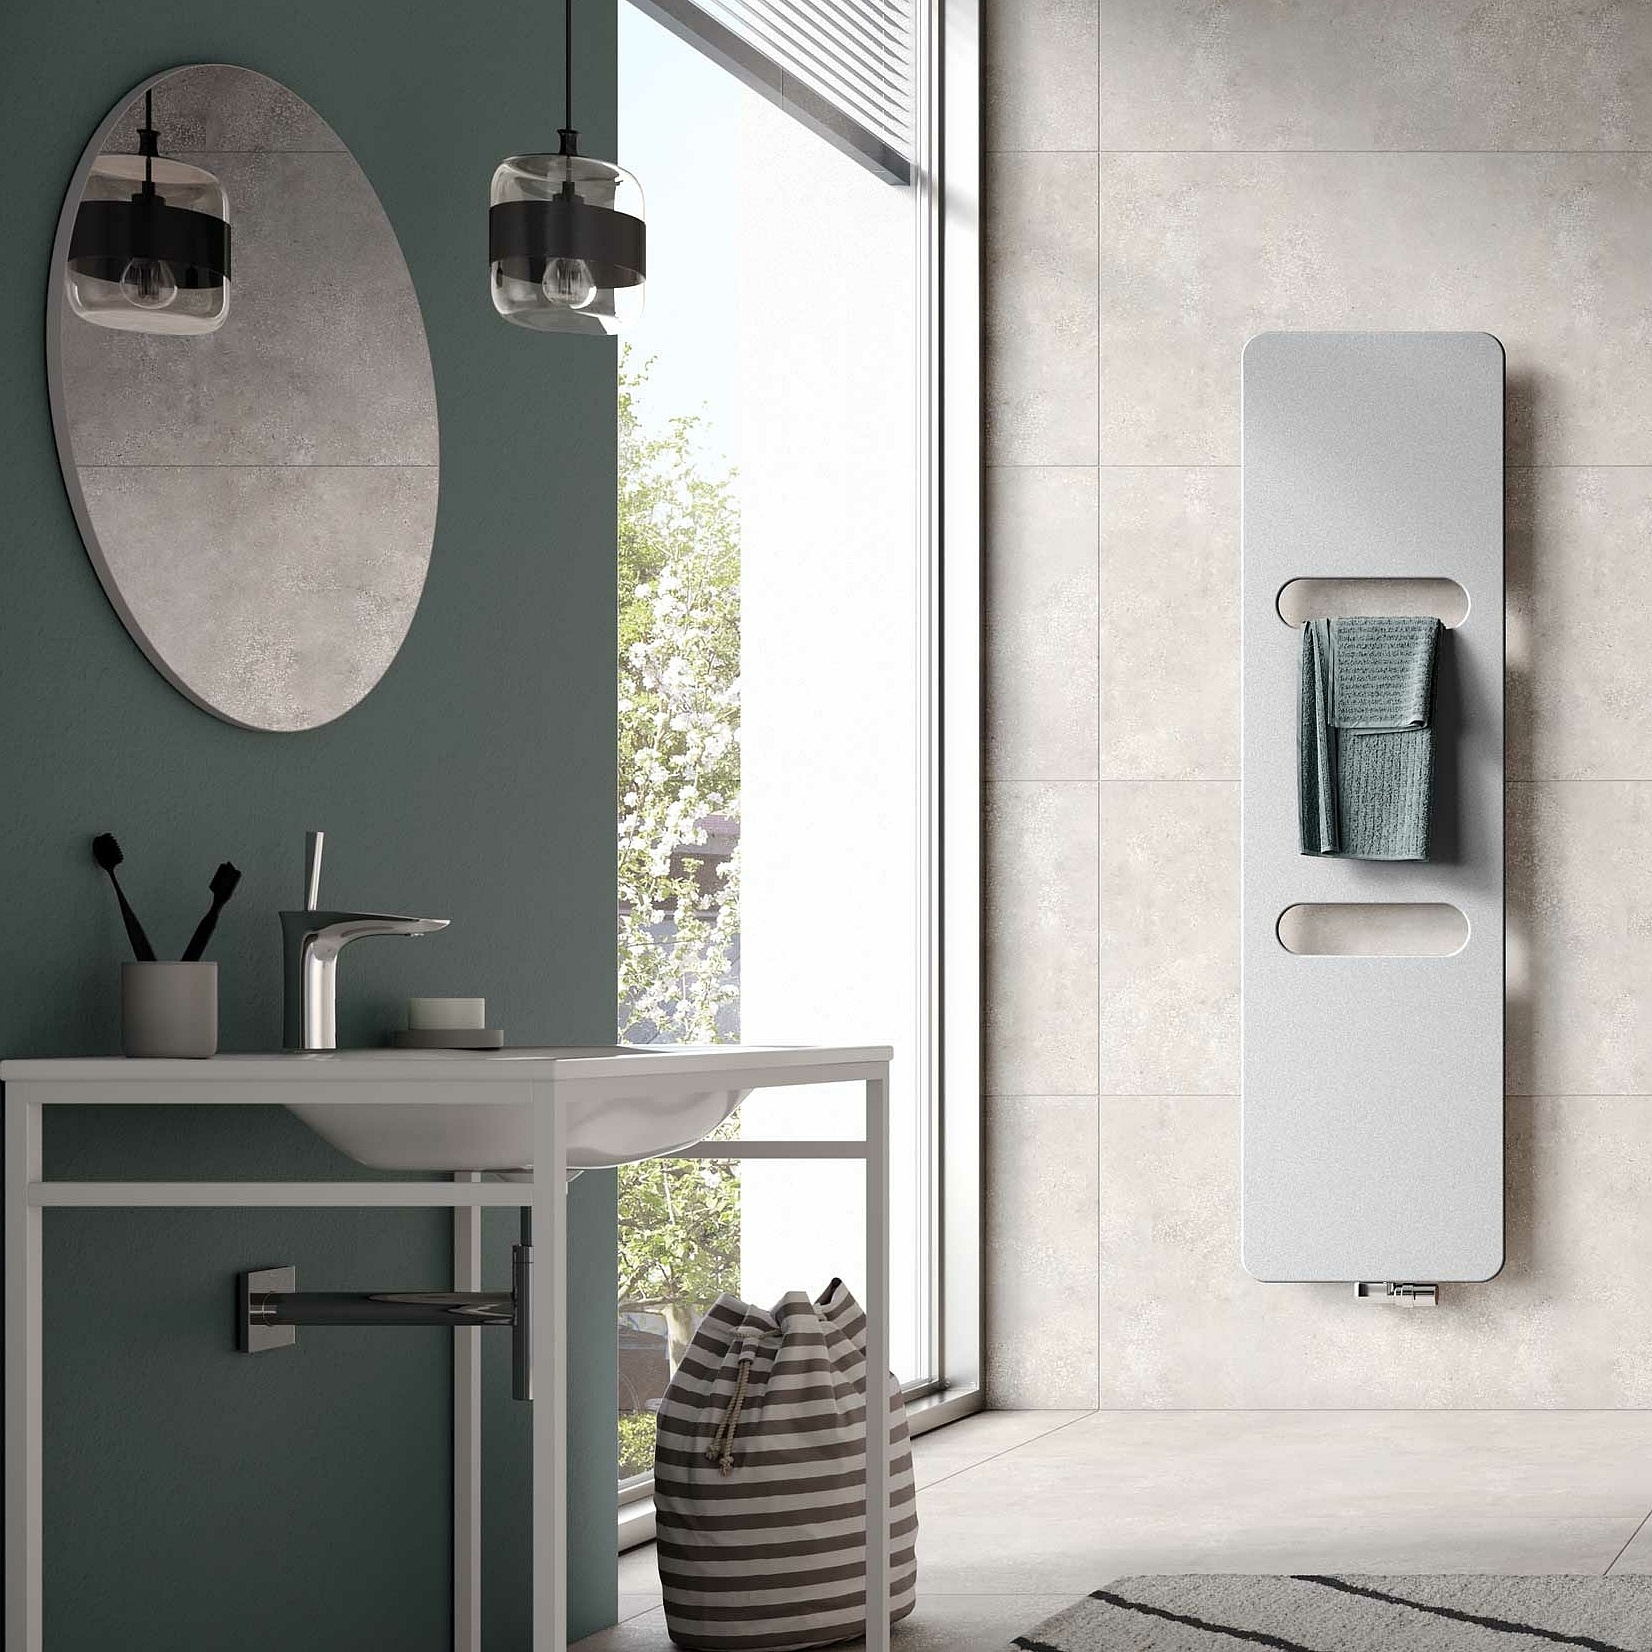 With two rounded recesses, the Fineo design and bathroom radiator from Kermi gets towels or clothes lovely and warm in no time.